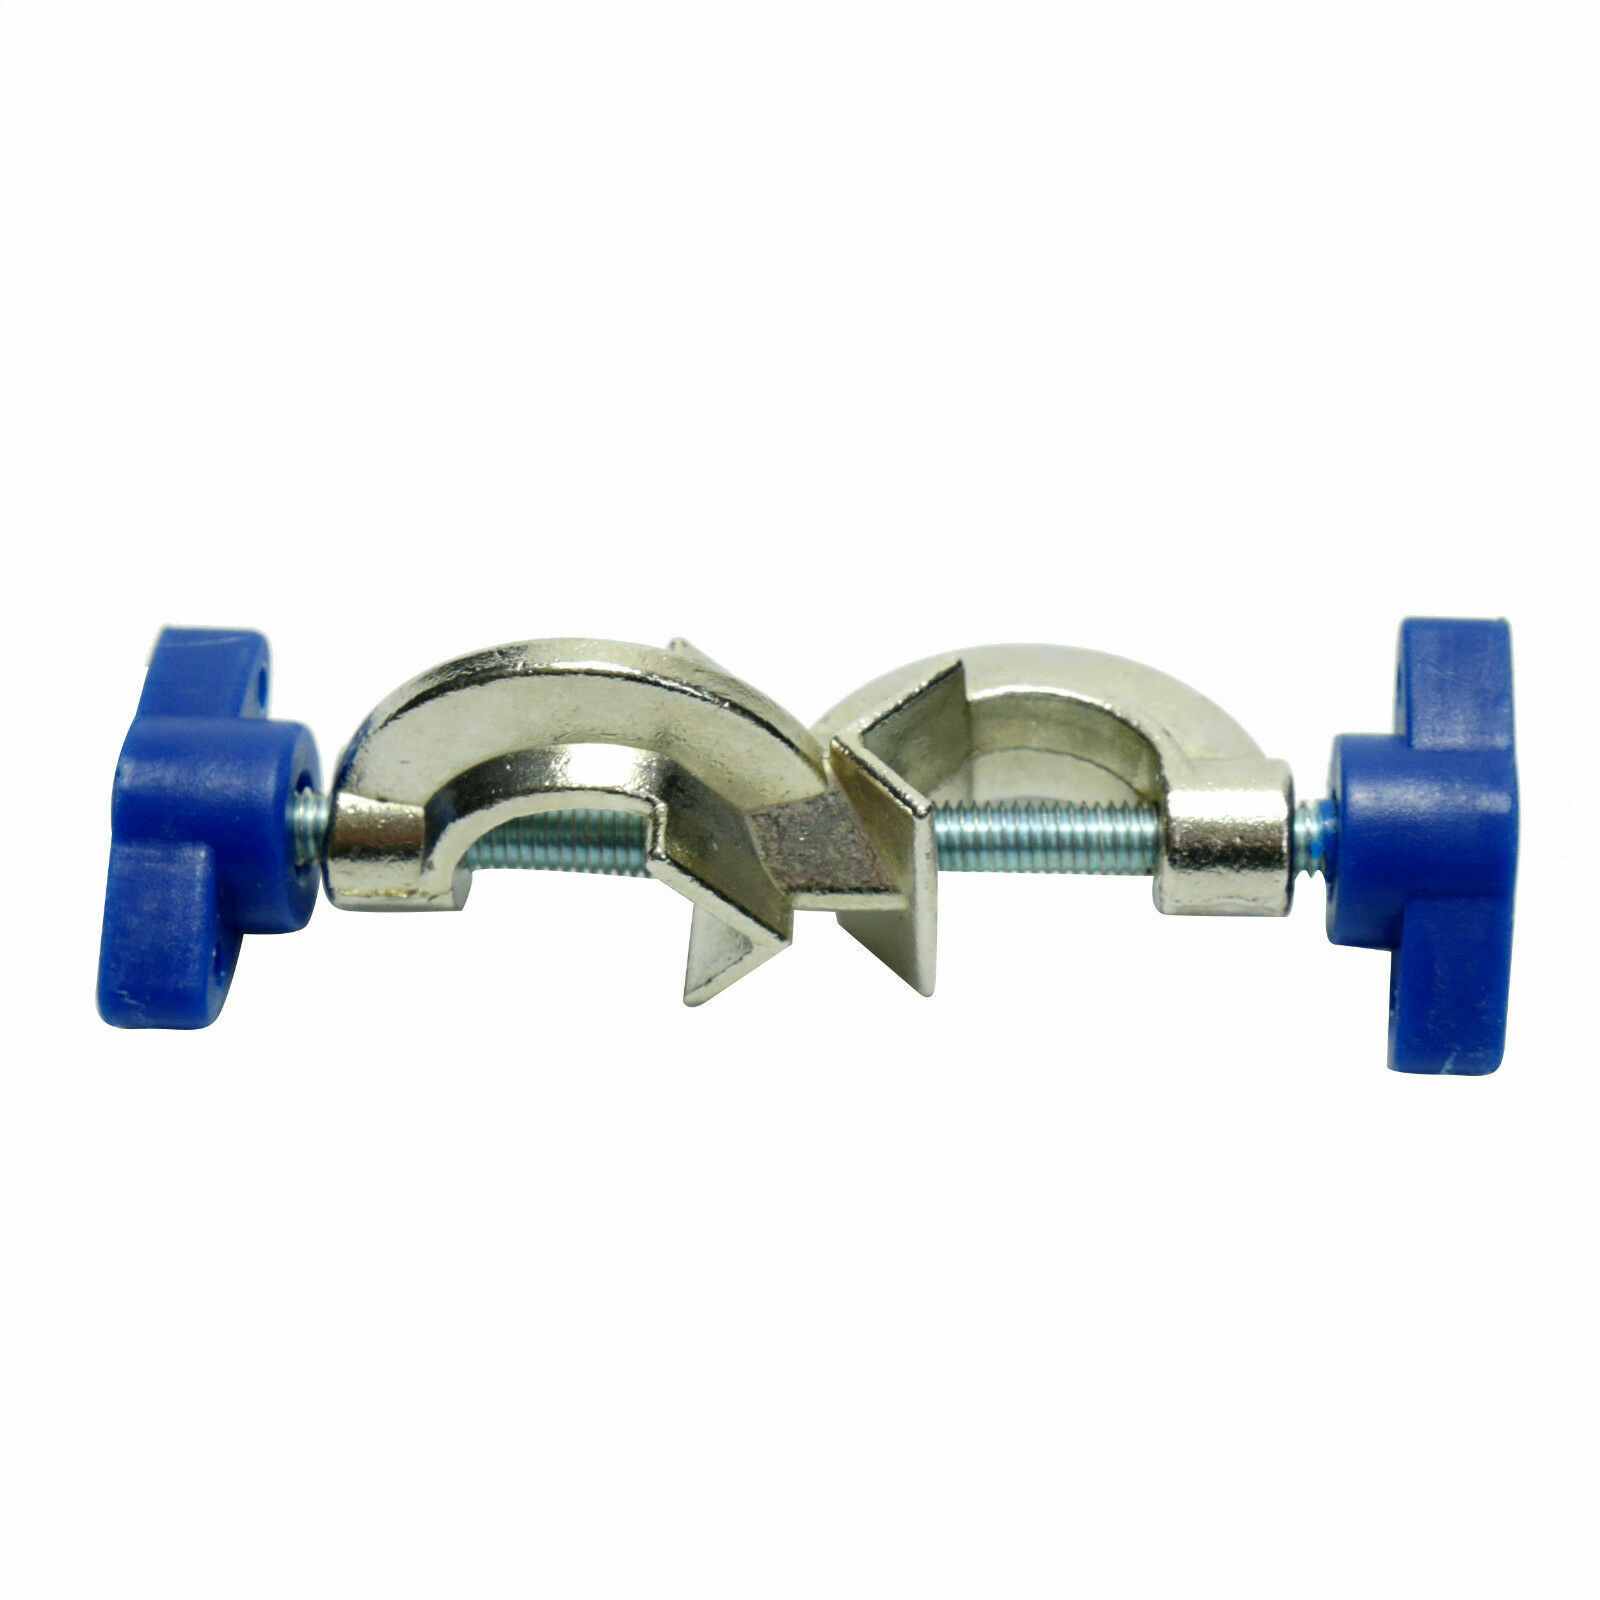 Lab Stands Boss Head Clamps Holder,laboratory Metal Grip Supports